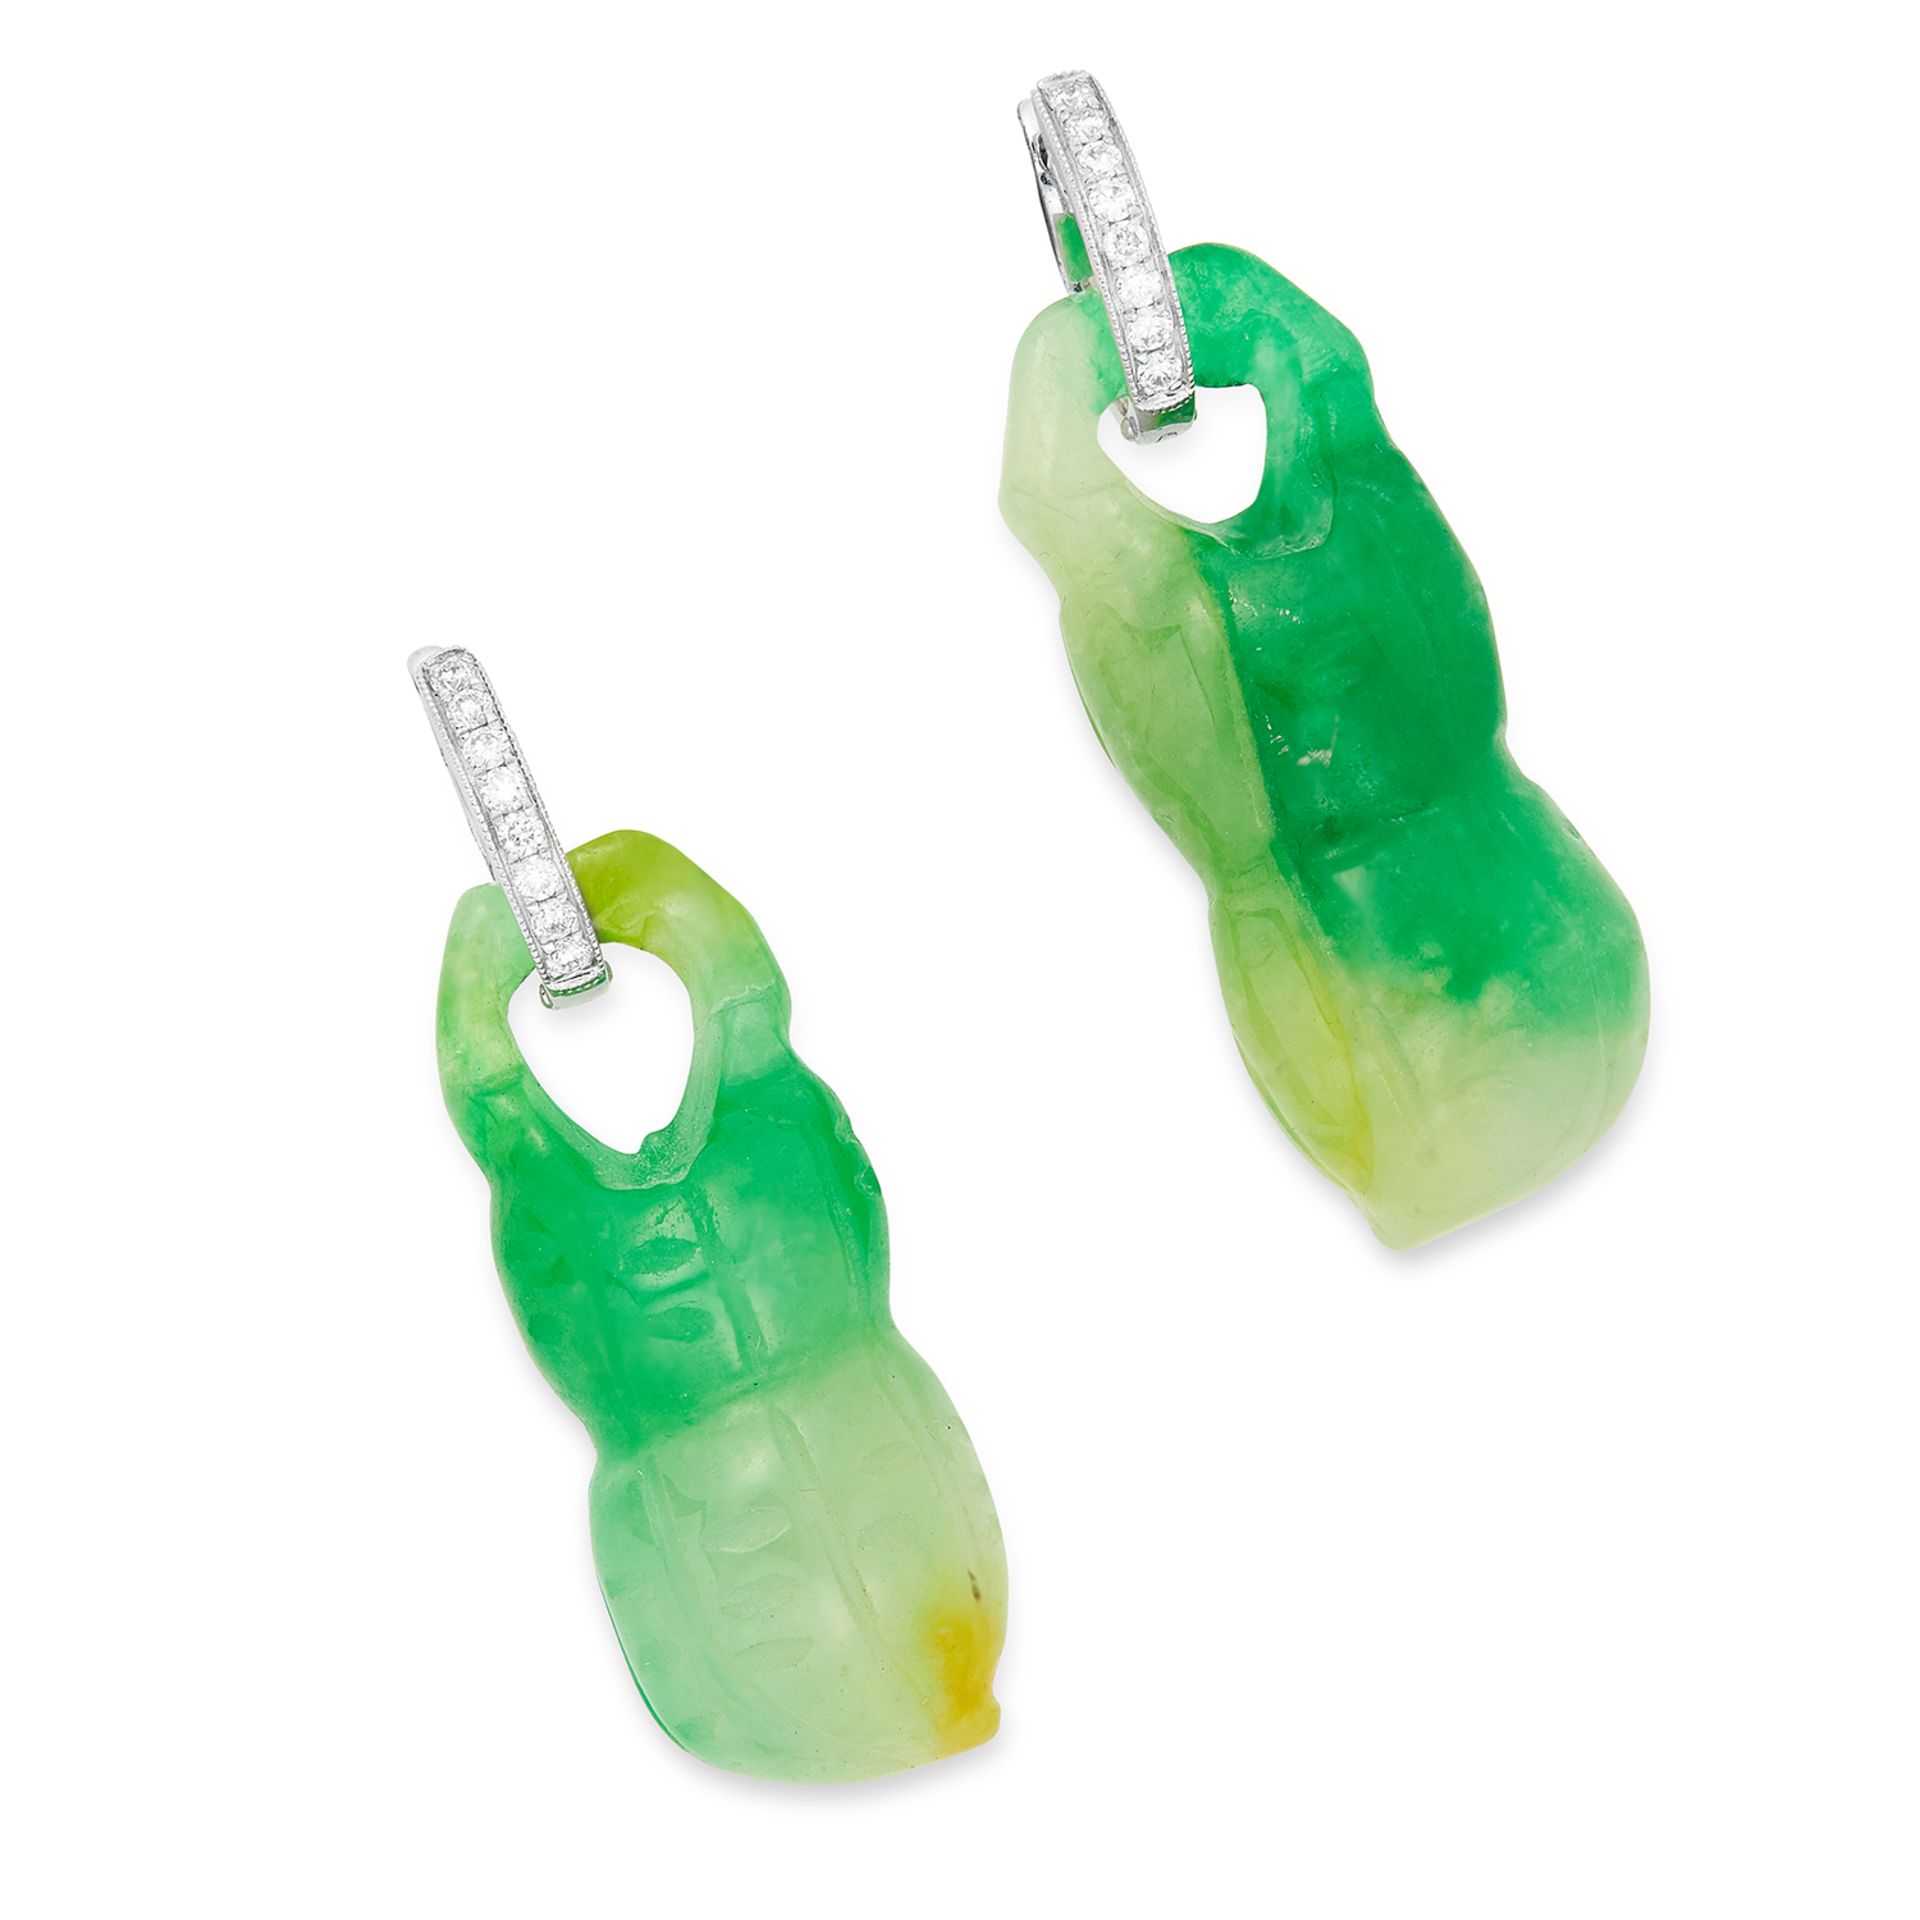 CARVED JADE AND DIAMOND EARRINGS each comprising of a hoop set with round cut diamonds suspending